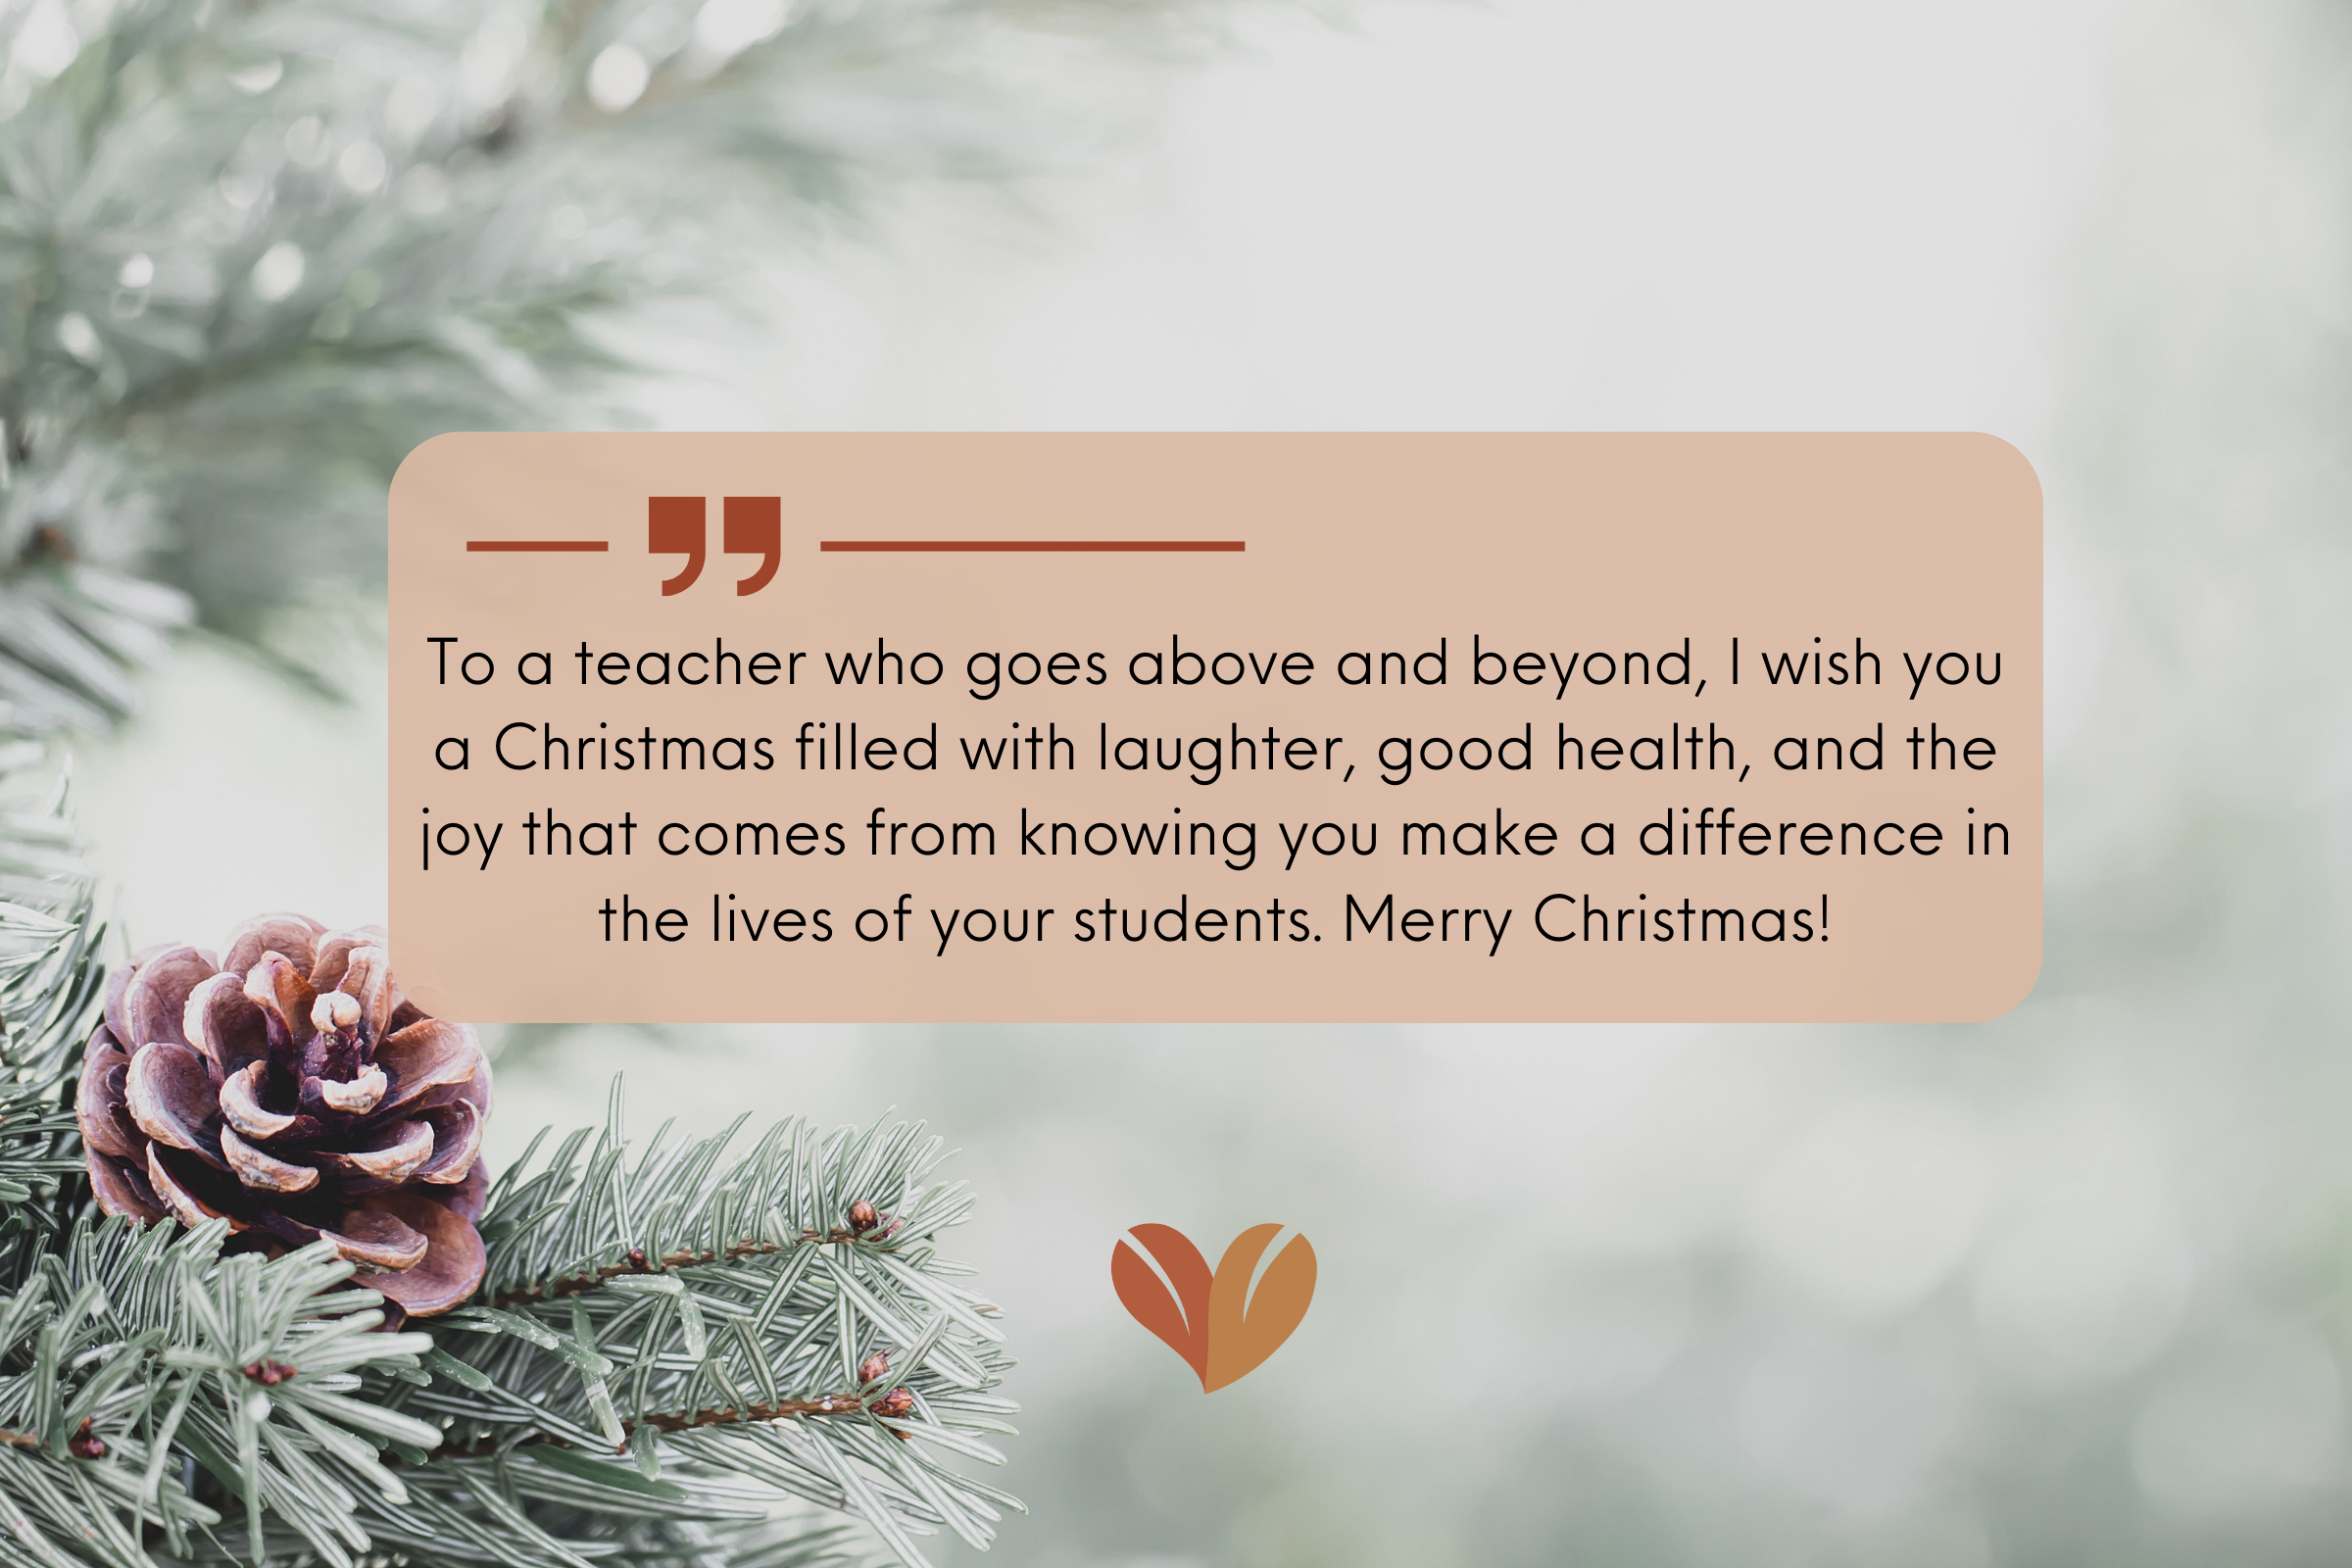 Touching wishes to teacher on Christmas Eve